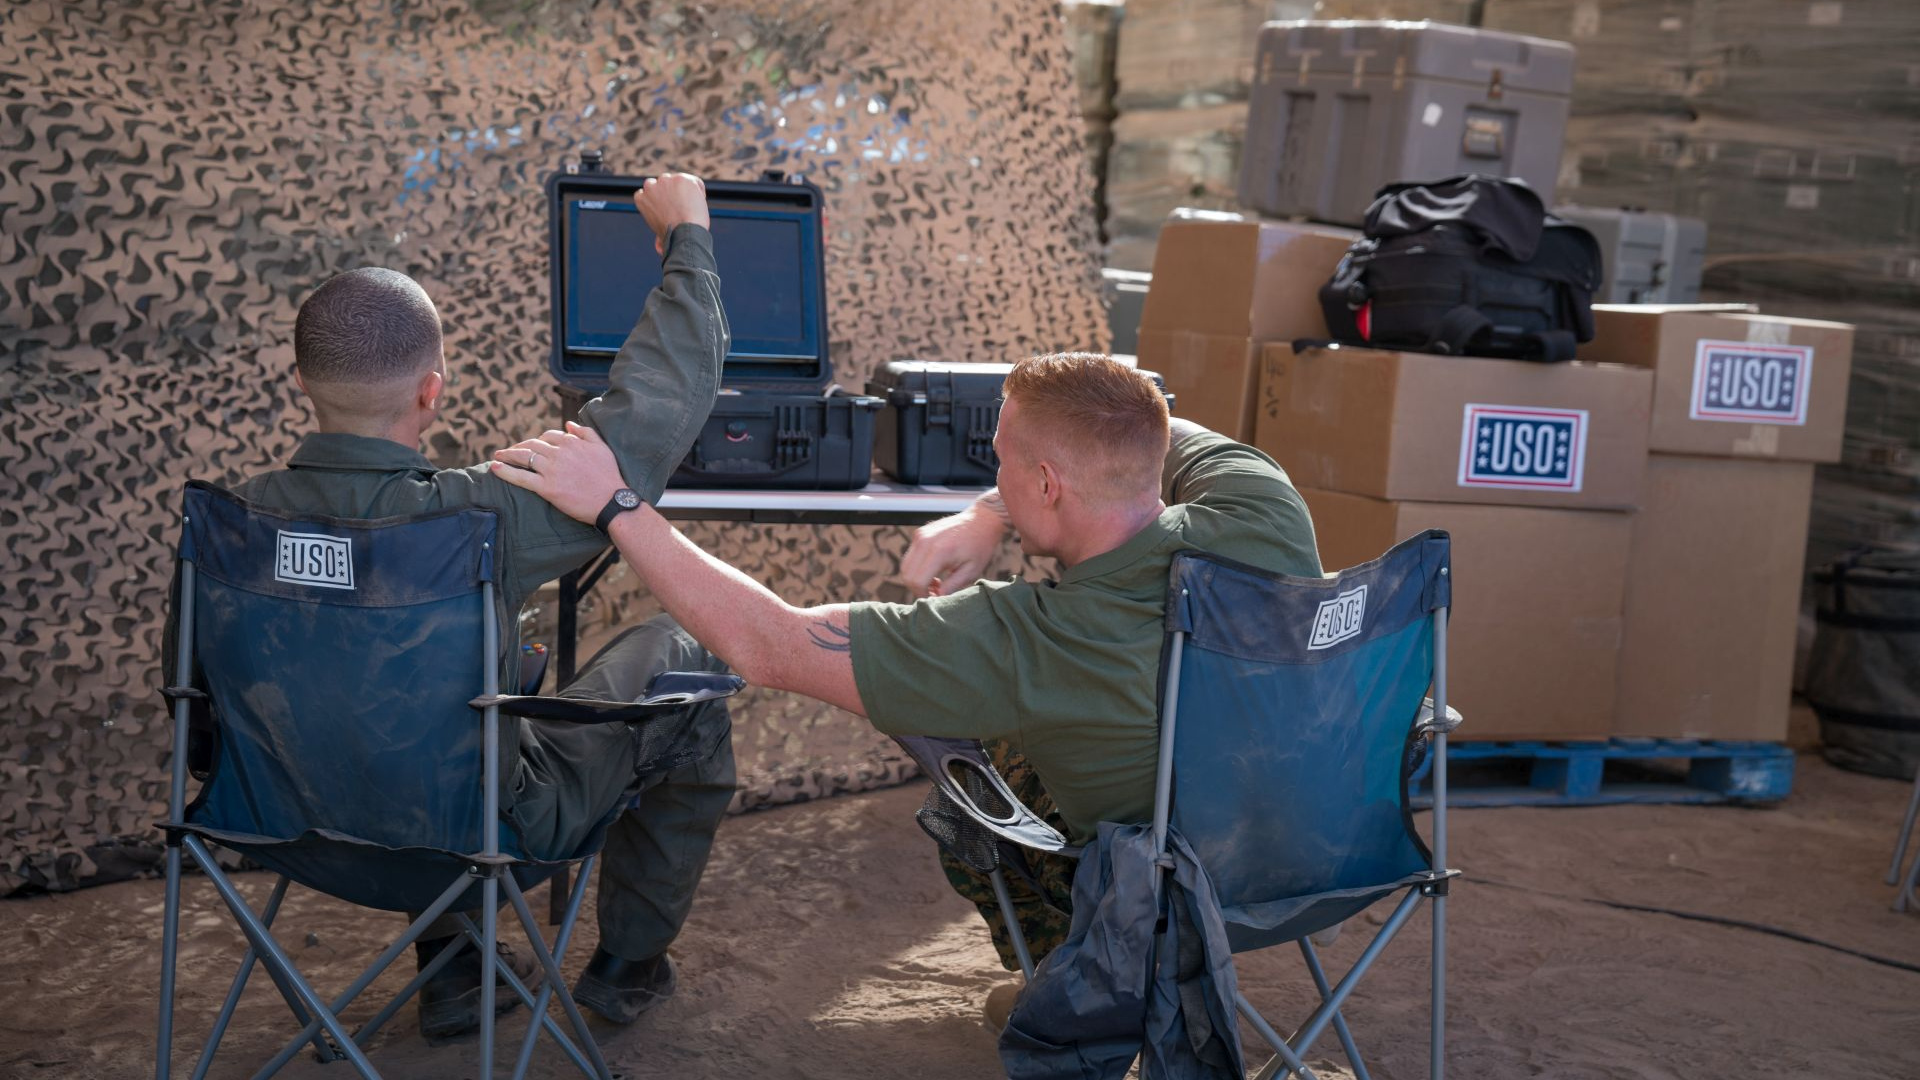 Two service members sitting in camping chairs celebrate at a military encampment where they are able to play video games using mobile gaming kits.